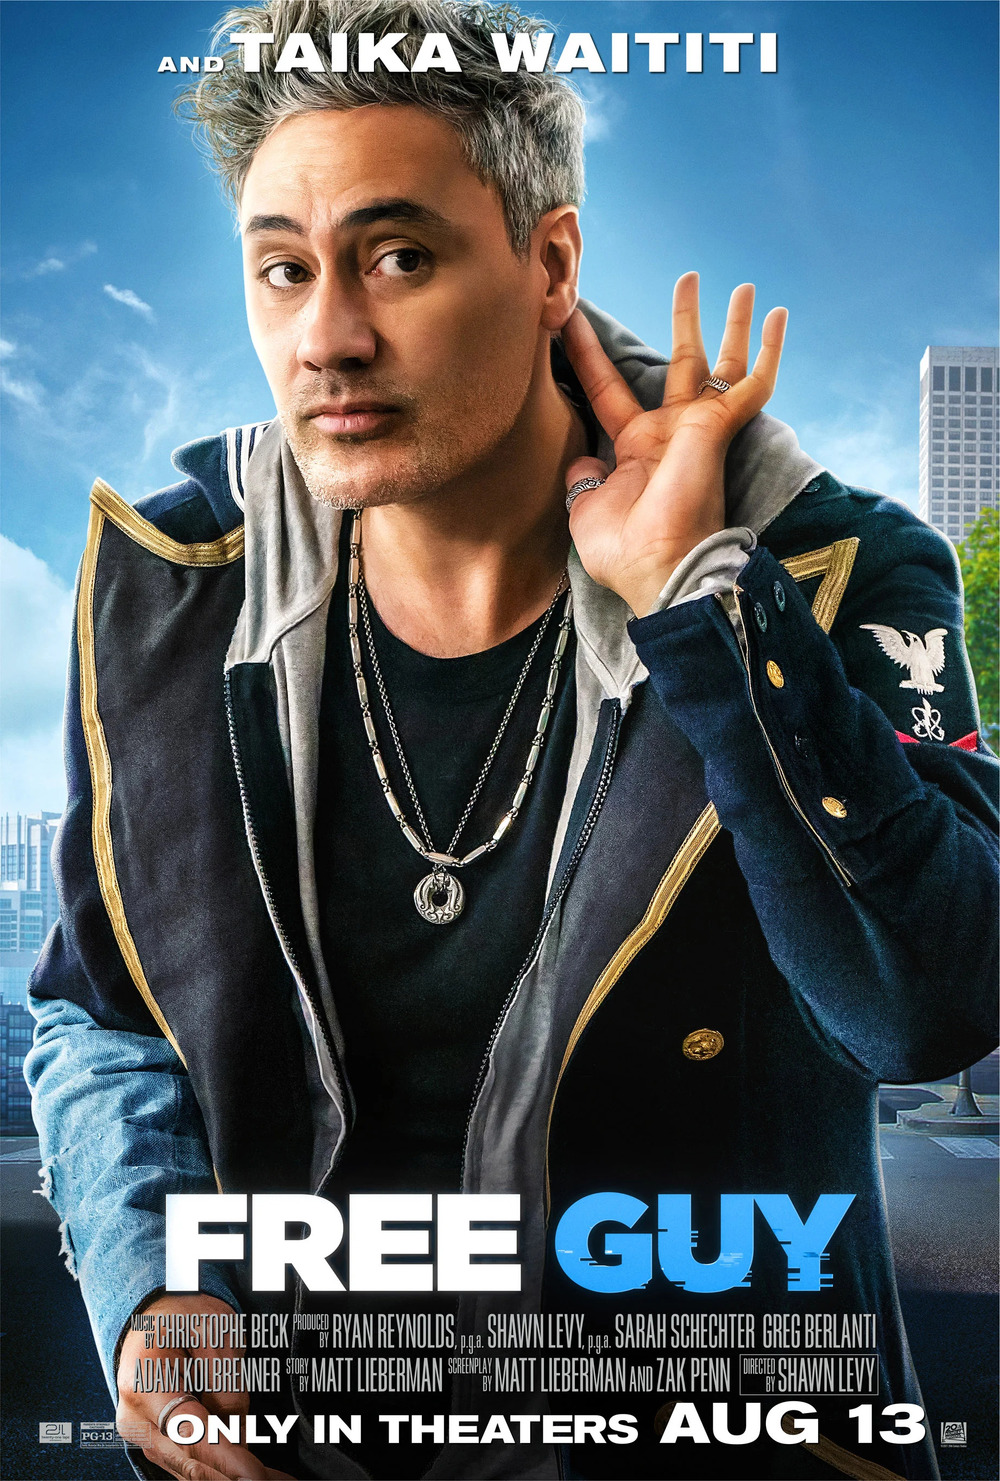 Is Free Guy Available On Netflix